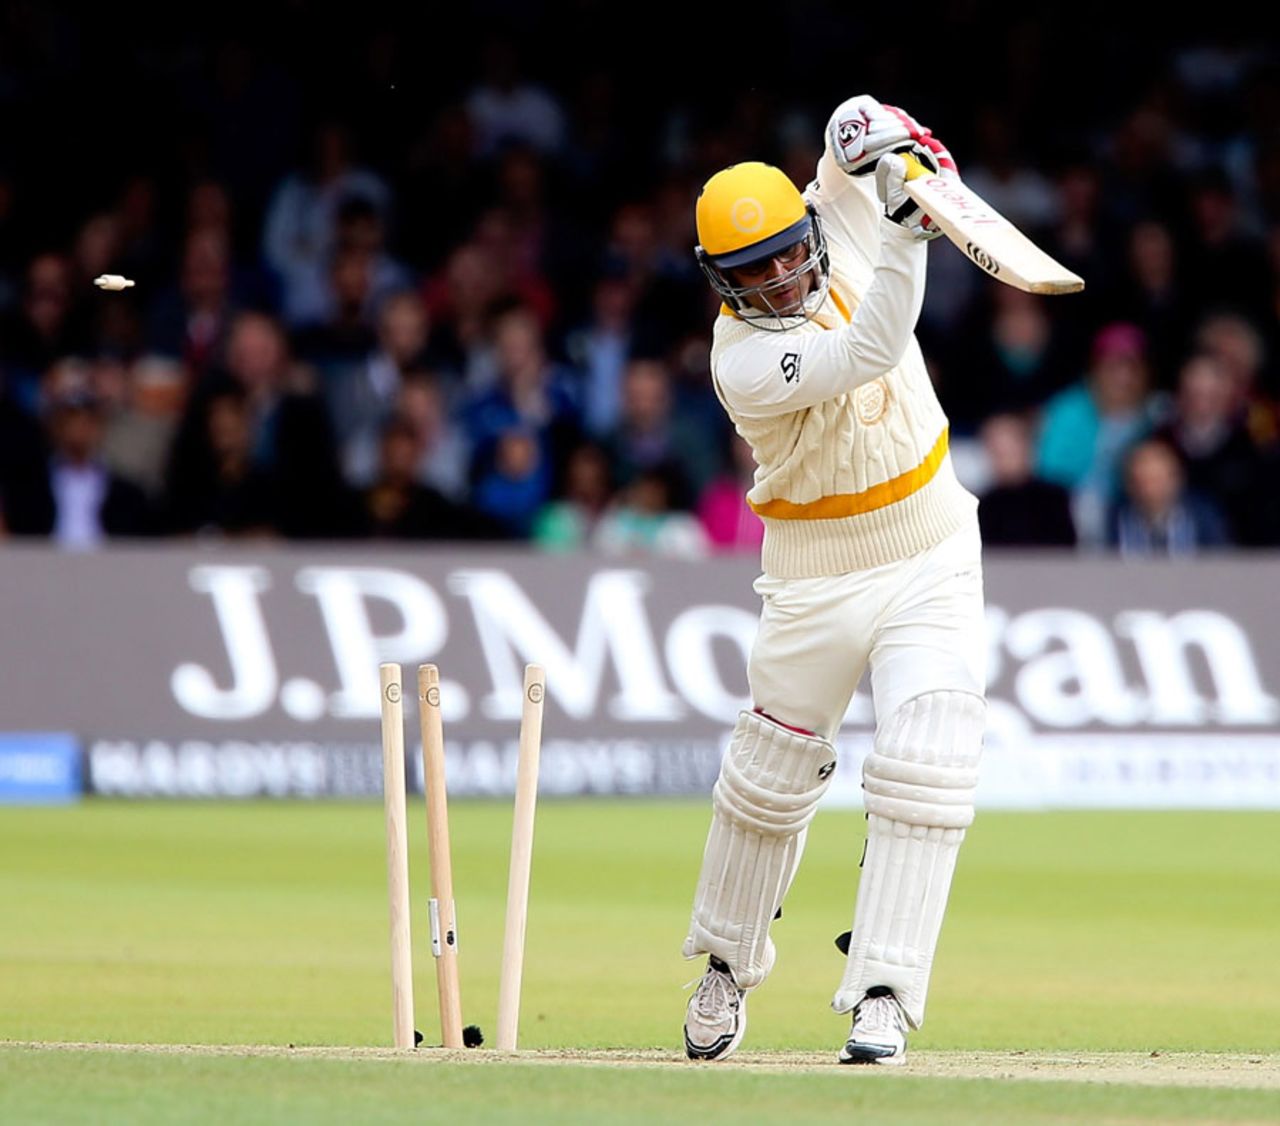 Virender Sehwag was bowled by Brett Lee for 22, MCC v Rest of the World XI, Lord's, July 5, 2014